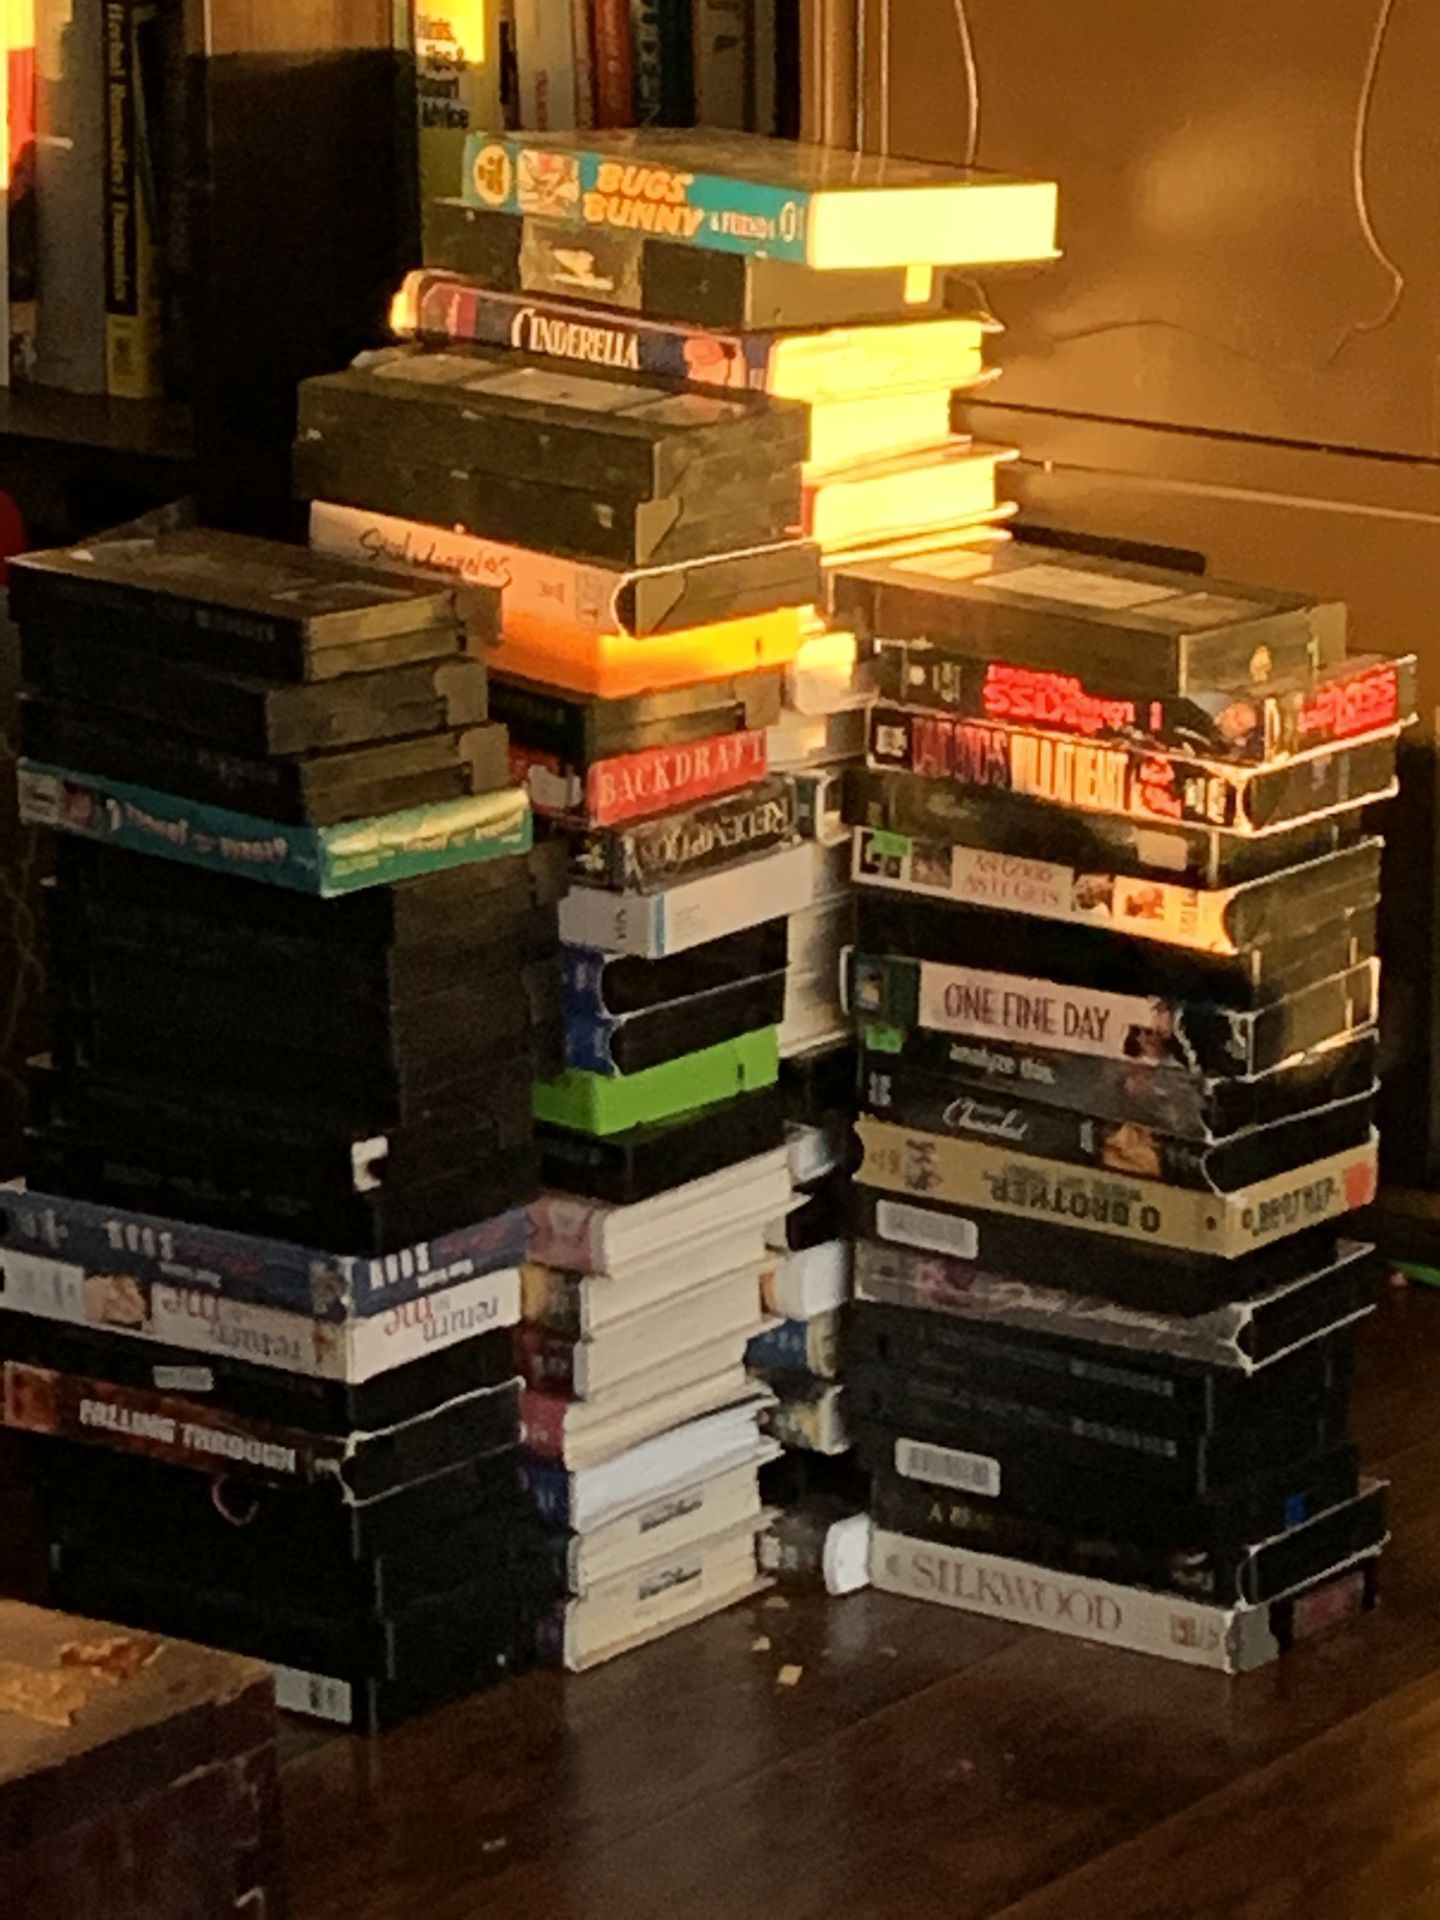 73 vhs movies and one vcr cleaning tape.